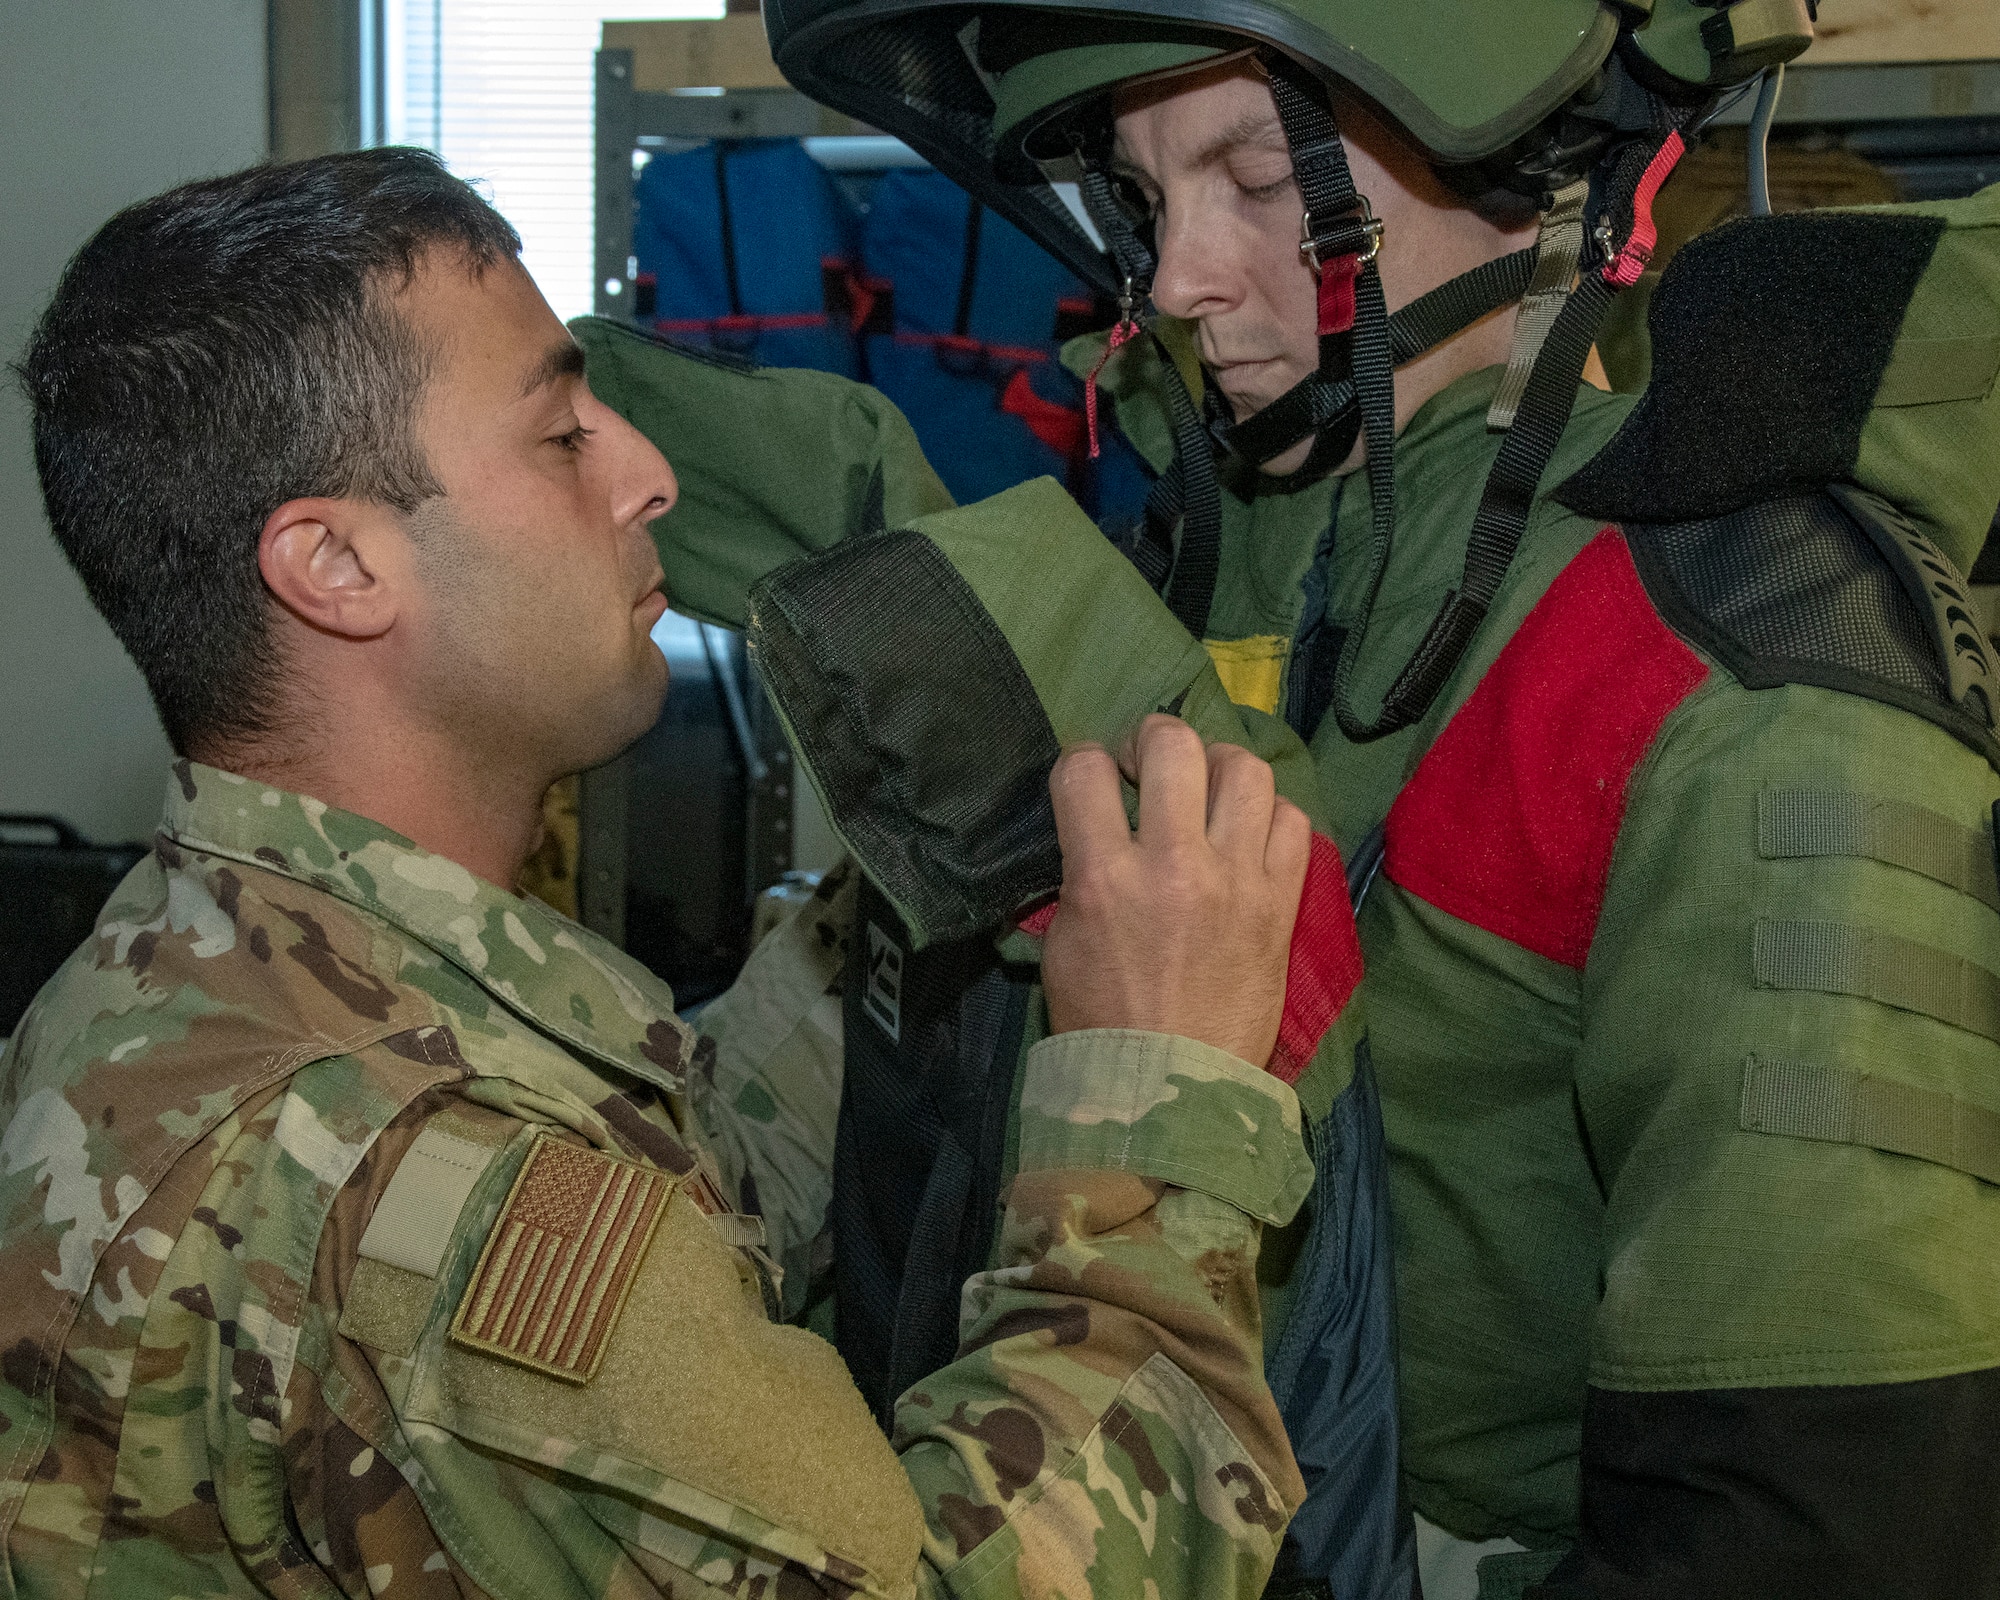 MSgt Mark Jurakovich from the 166th Airlift Wing Explosive Ordinance Disposal Unit, Delaware Air National Guard and the Outstanding Airman of the Year in the category of Senior Noncommissioned officer gets assistance with EOD bomb suit, Jun 6, 2019. OAY is an ANG command chief program to recognize the best of the best Airman throughout the ANG enterprise. (U.S. Air National Guard photo by Master Sgt. David J. Fenner)